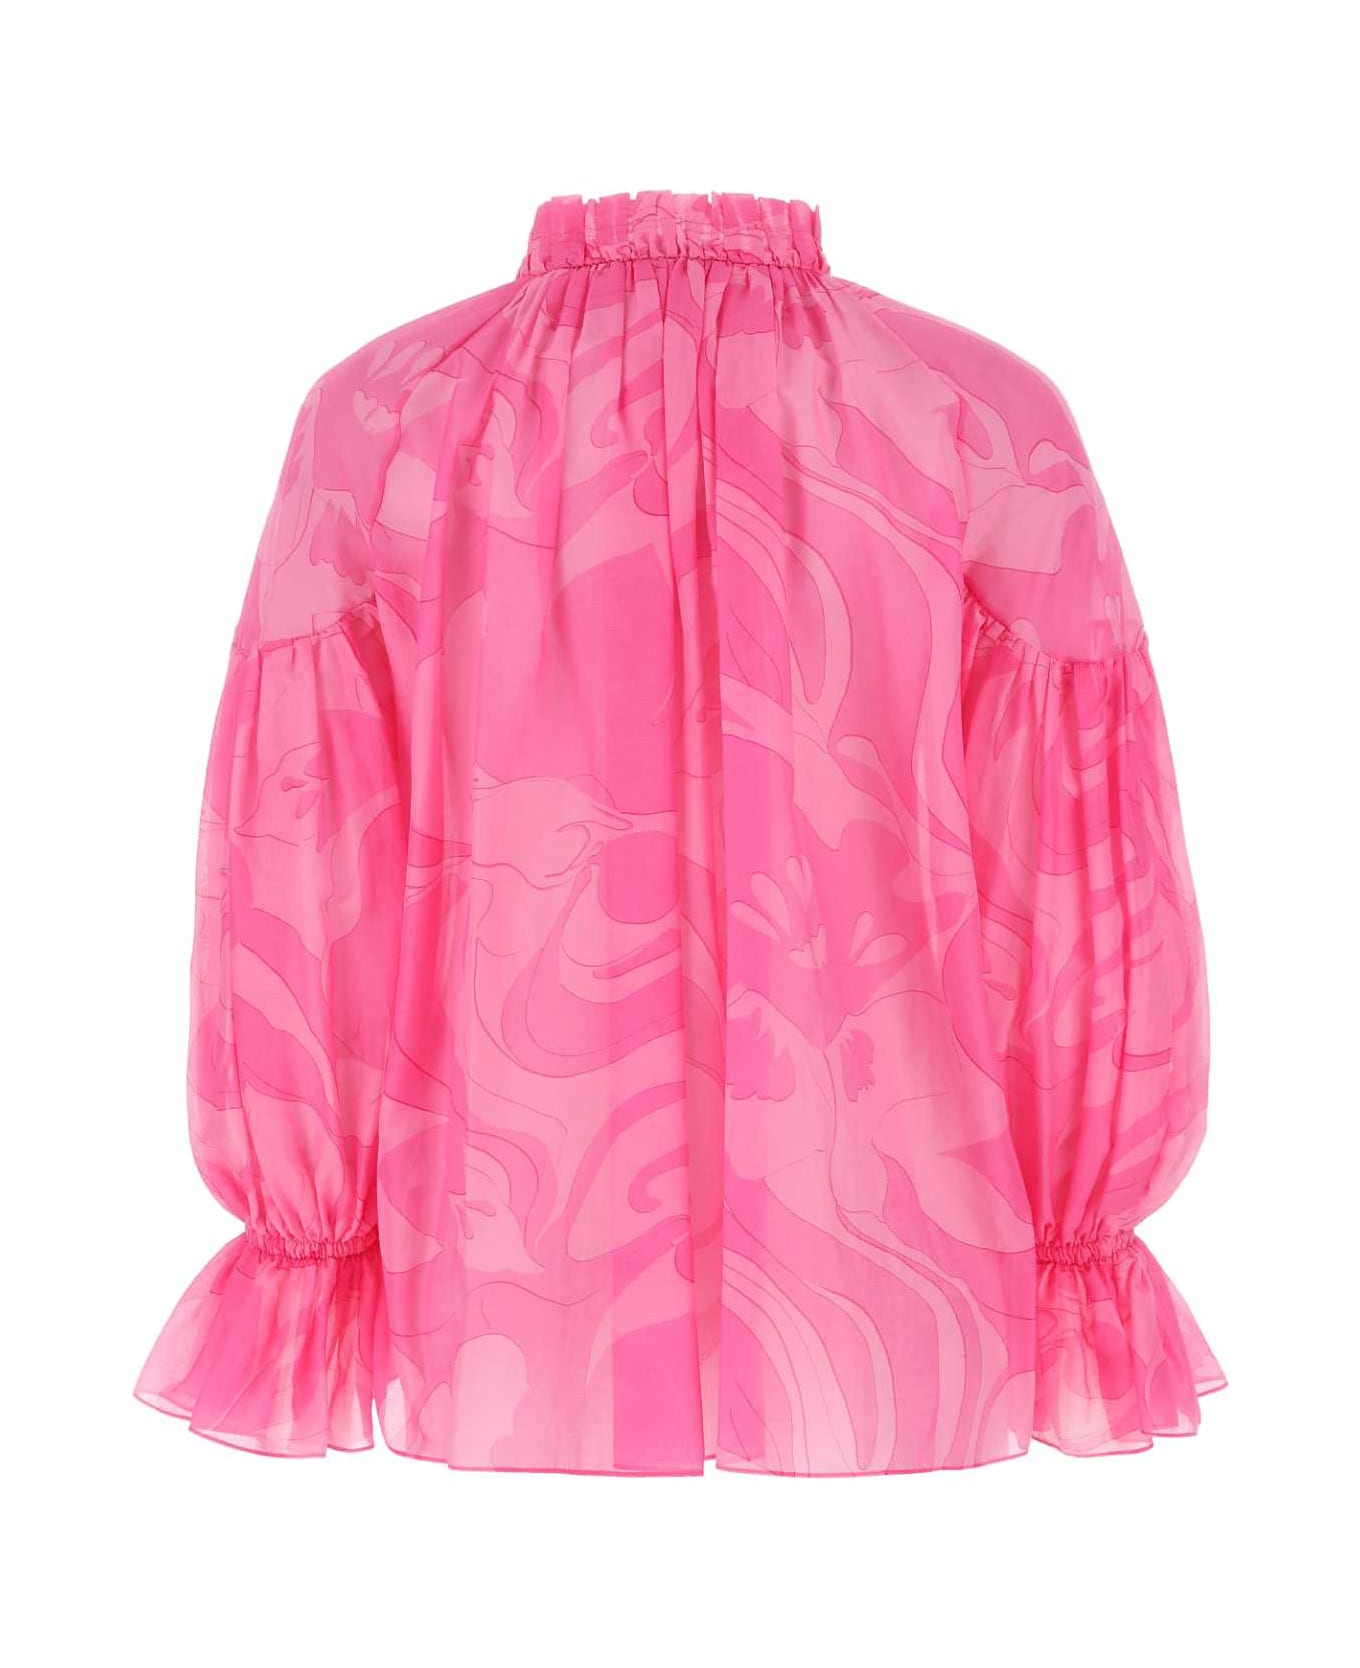 Etro Printed Voile Blouse - PINK